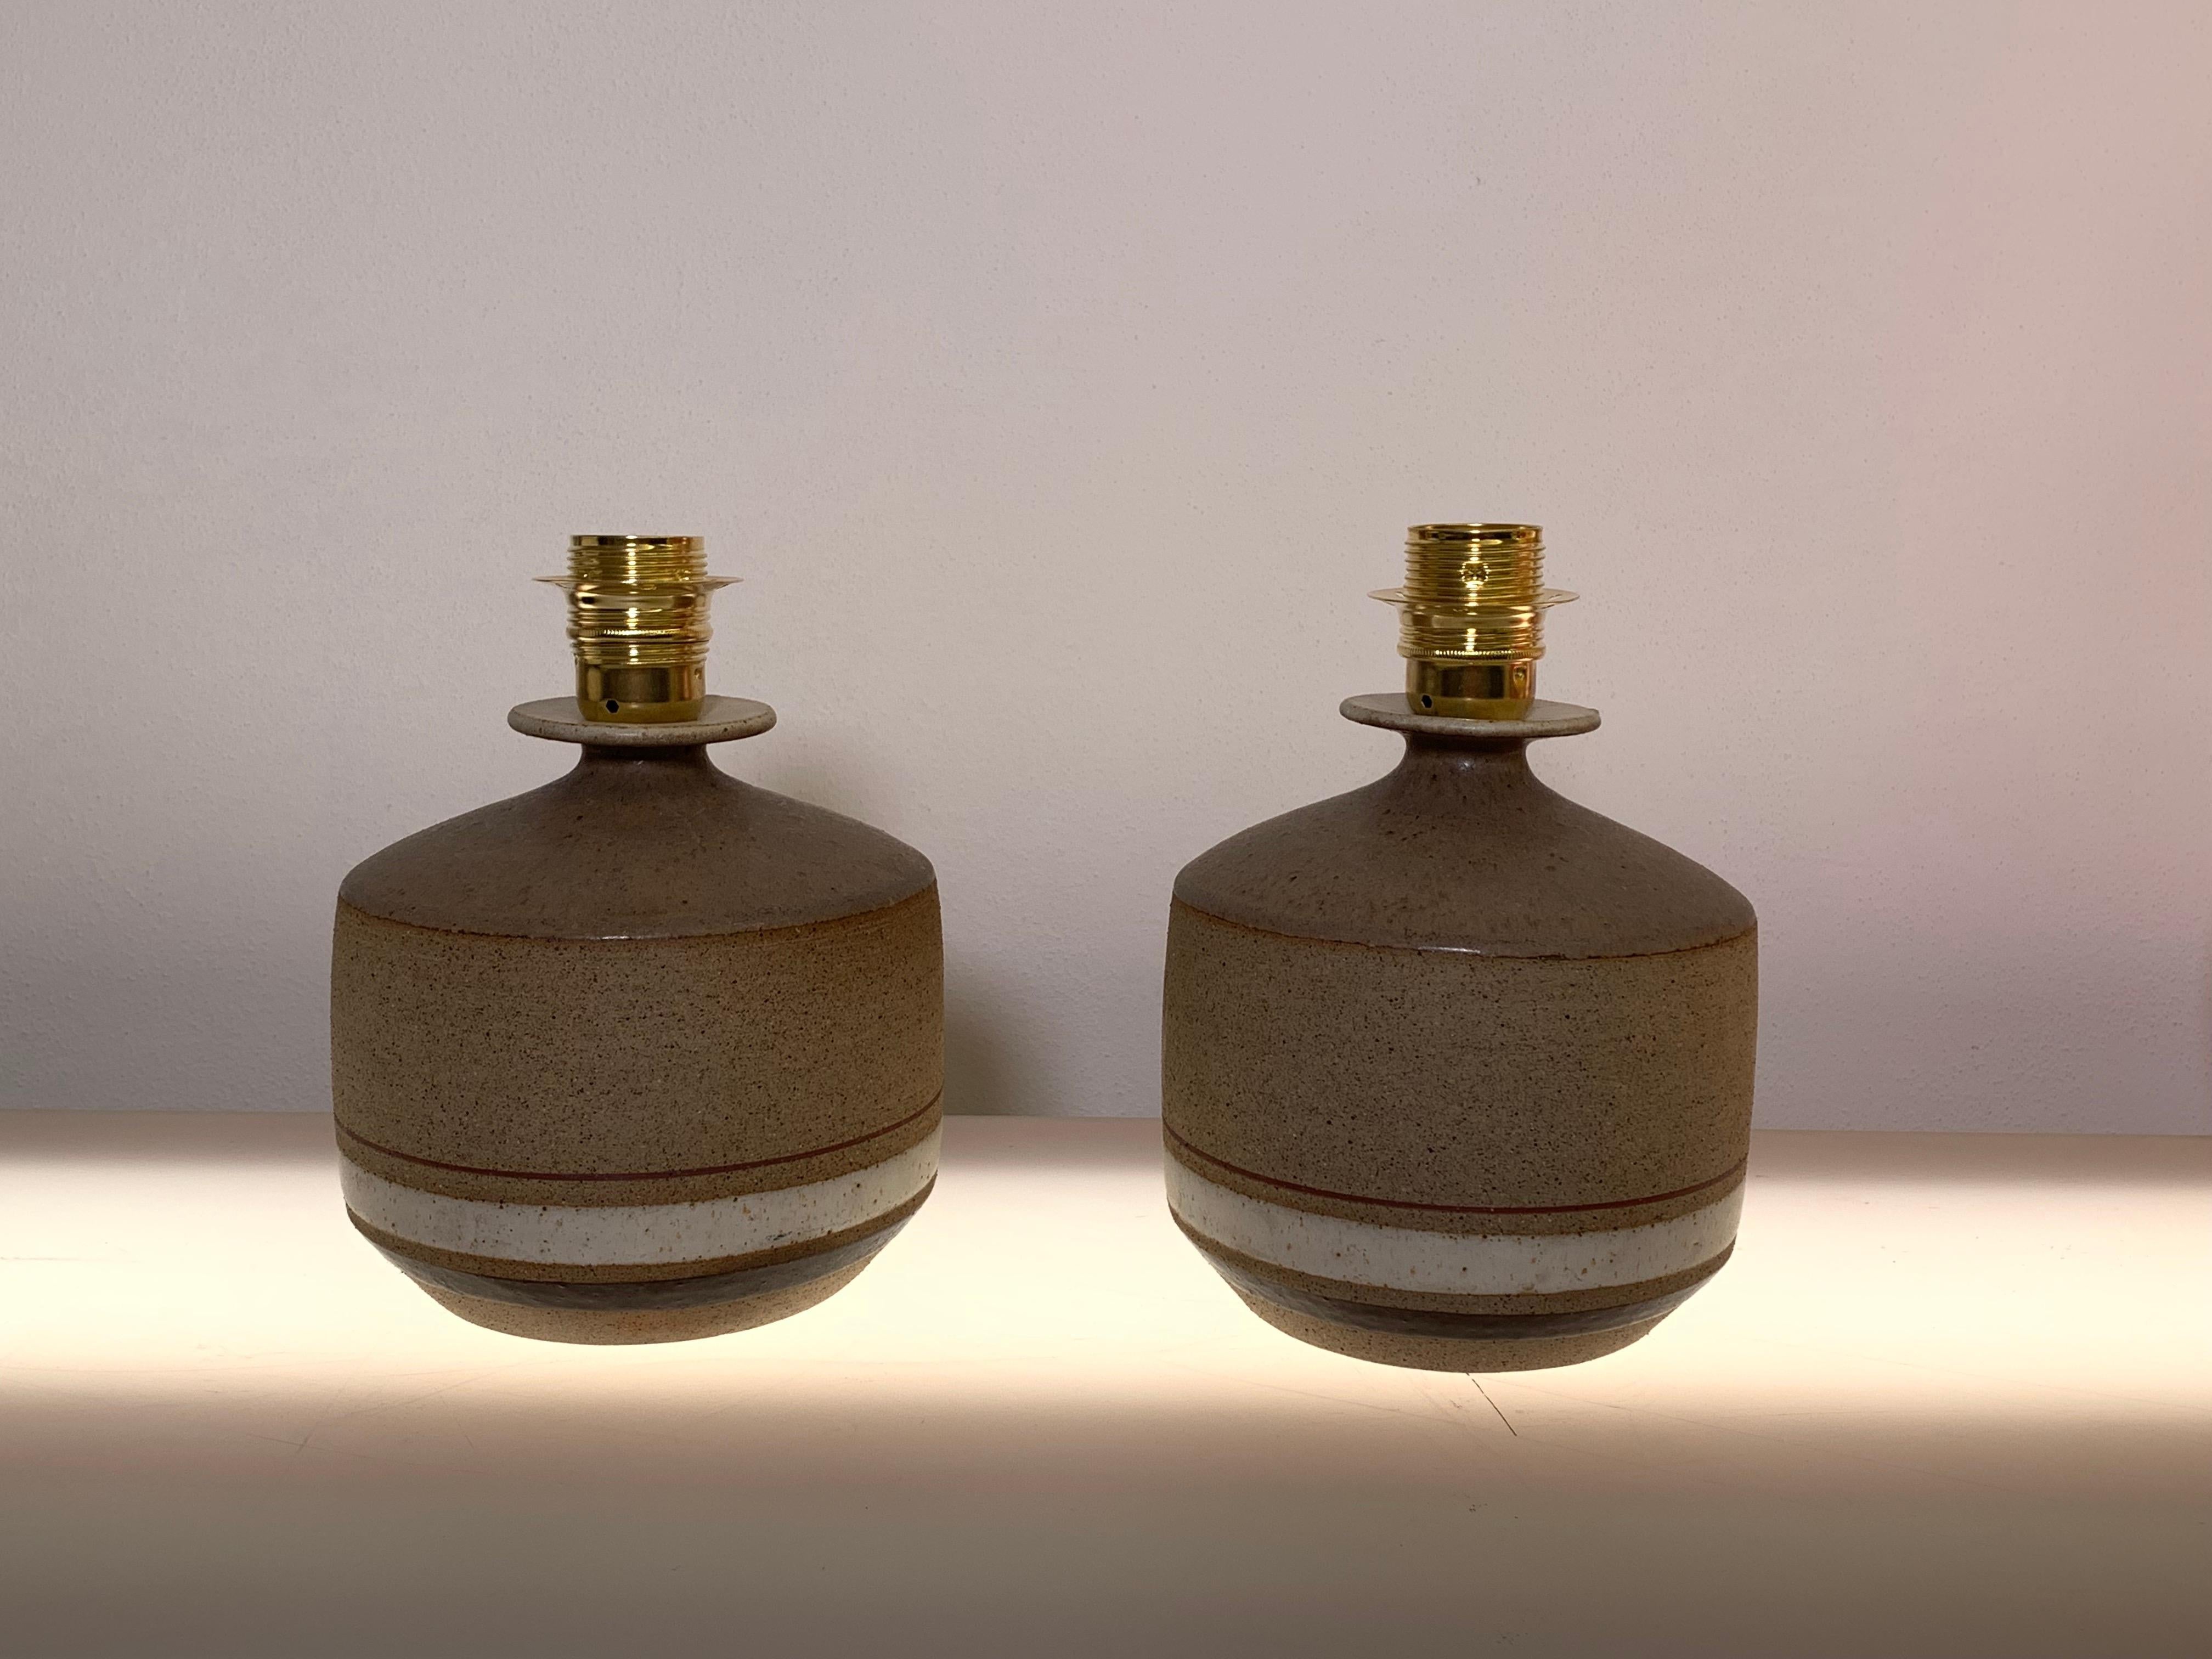 Two bases of stoneware lamps designed by the famous Italian artist Bruno Gambone. Signed on the bottom.